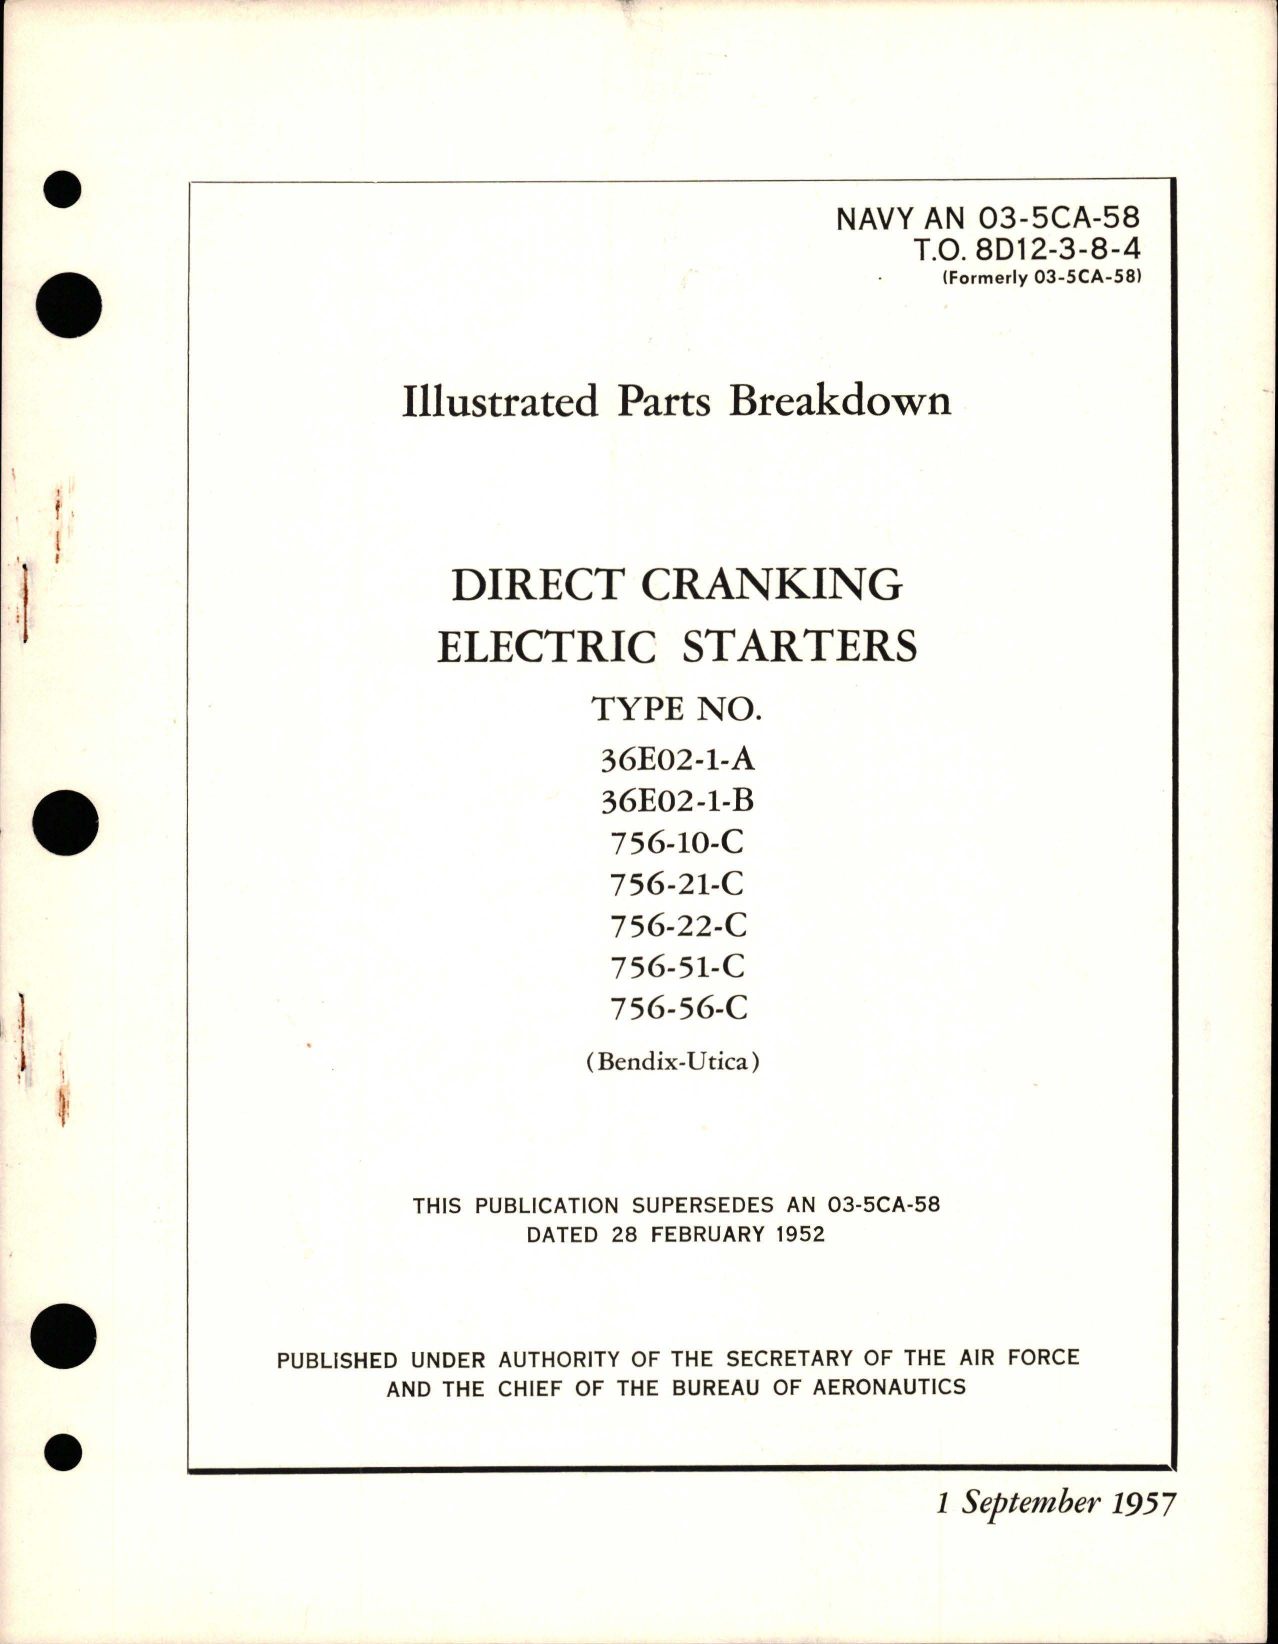 Sample page 1 from AirCorps Library document: Illustrated Parts Breakdown for Direct Cranking Electric Starters 